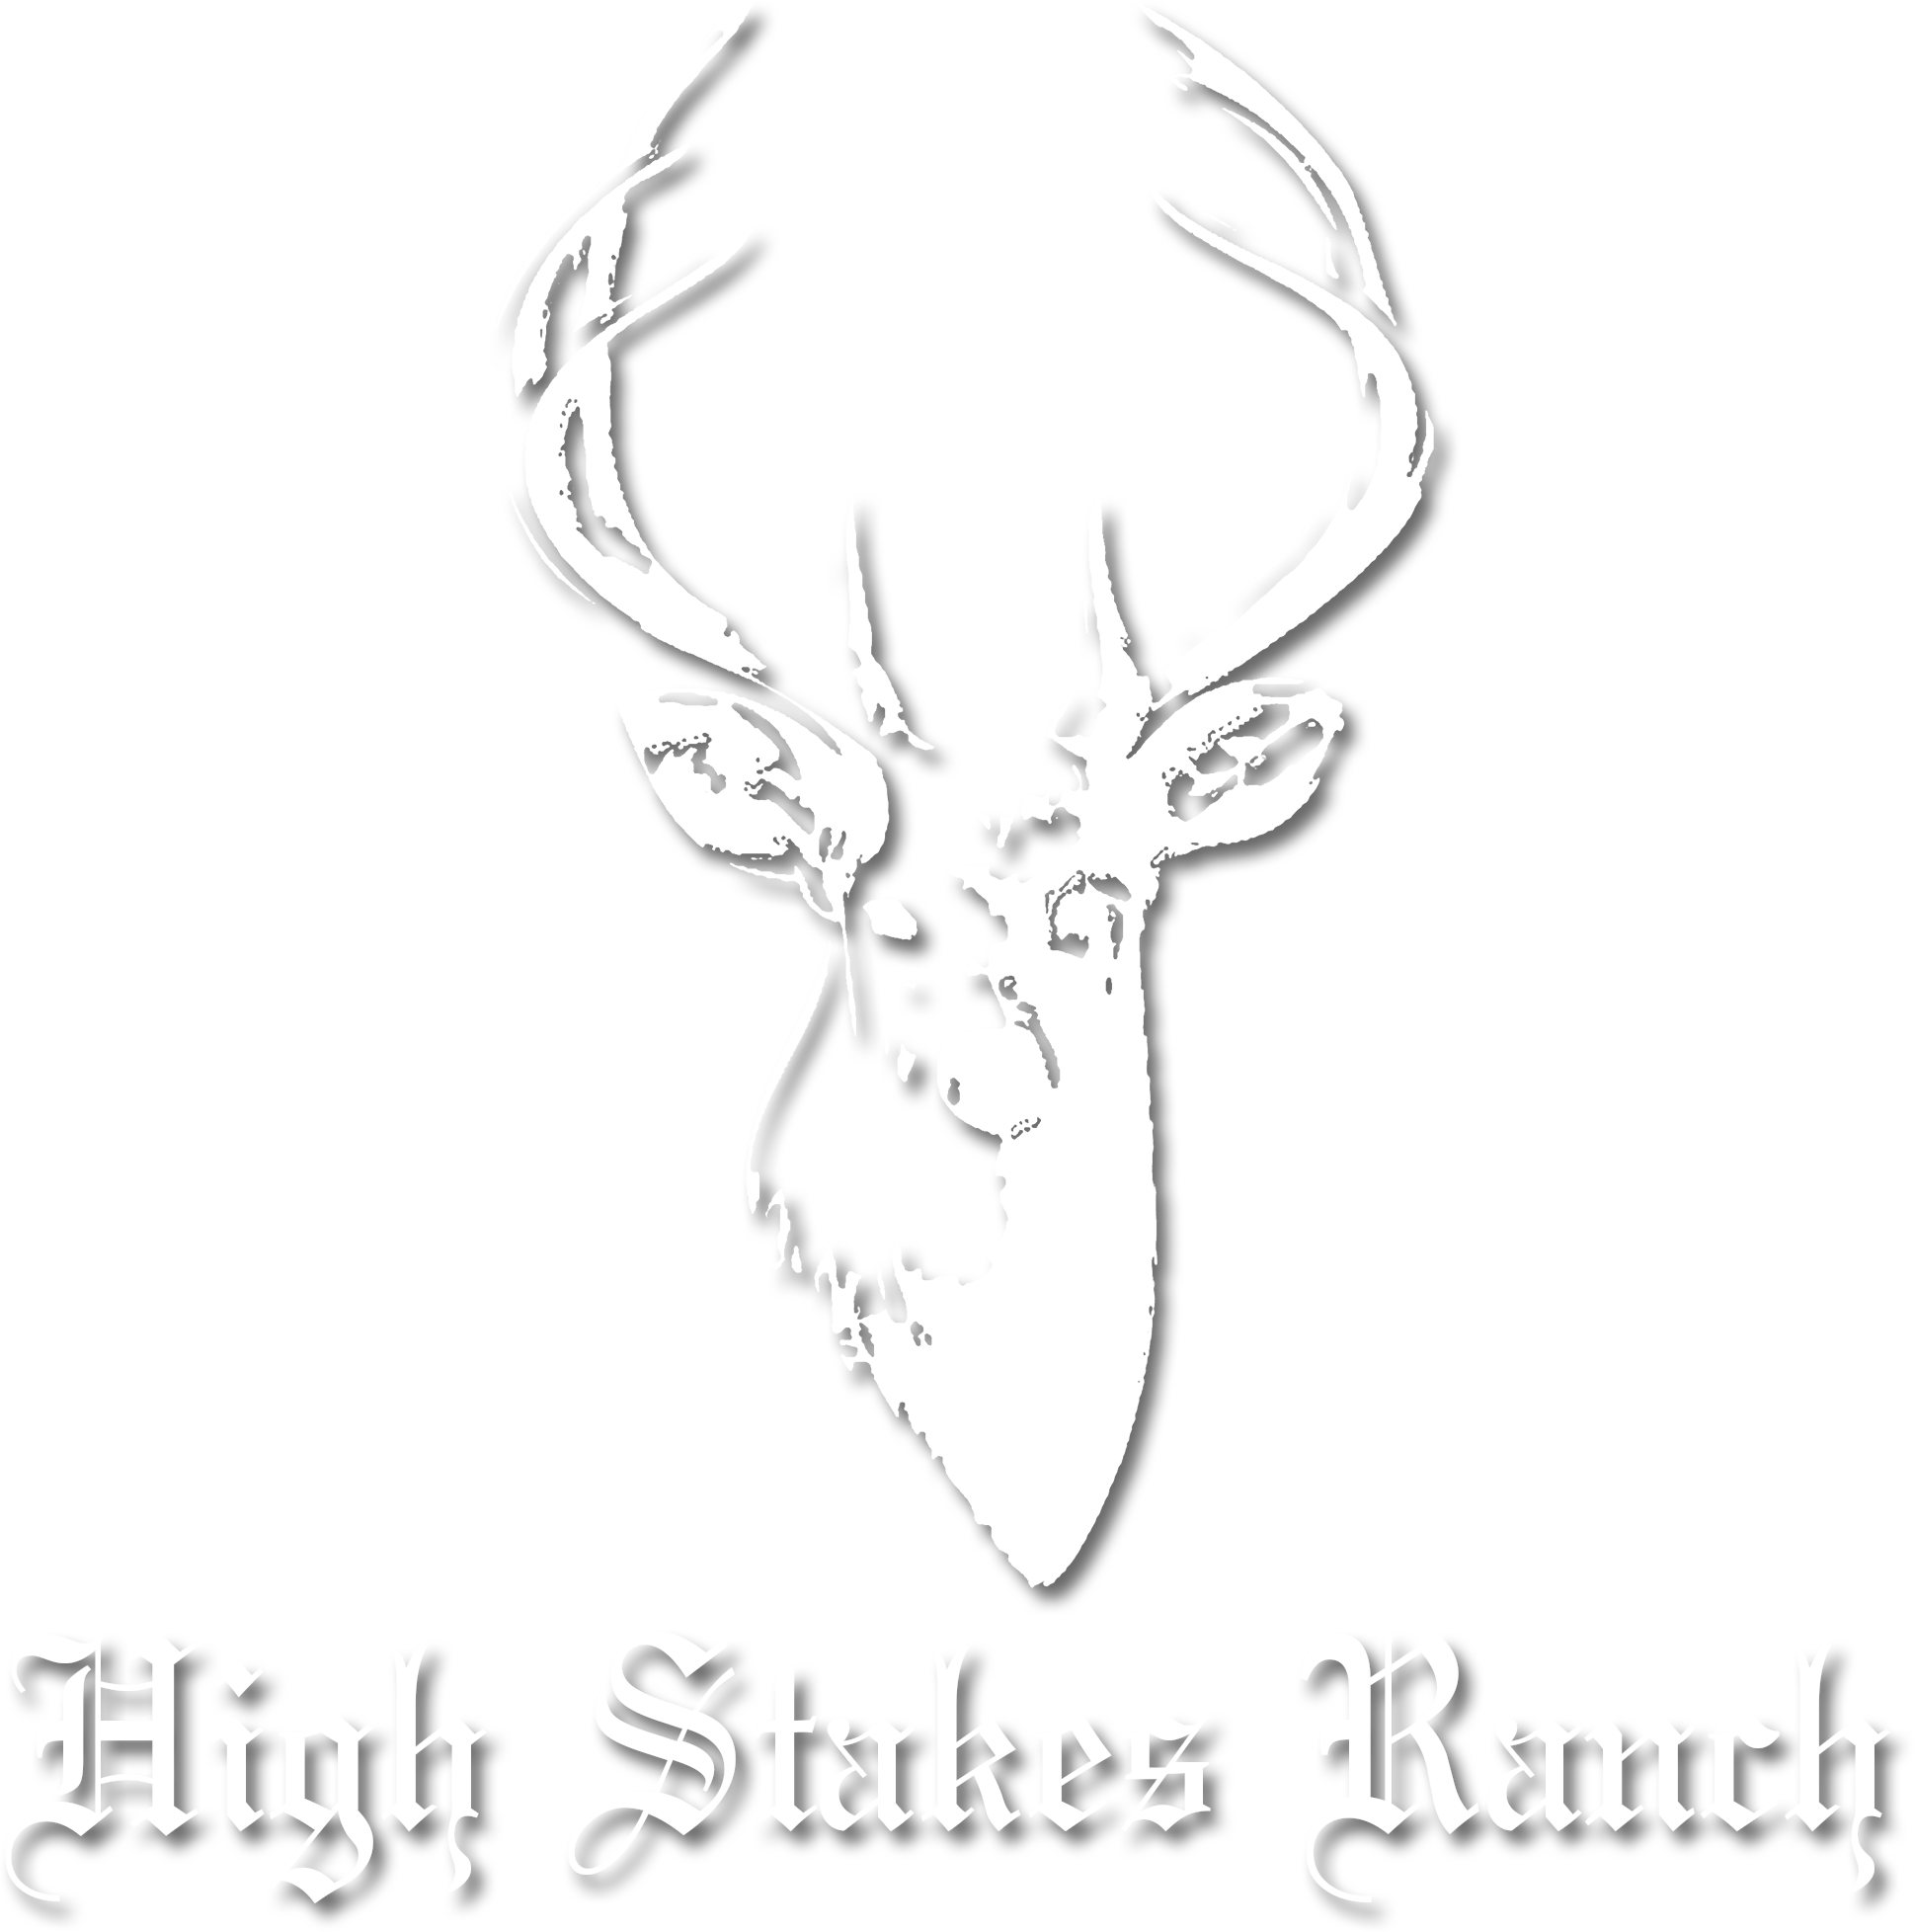 High Stakes Ranch